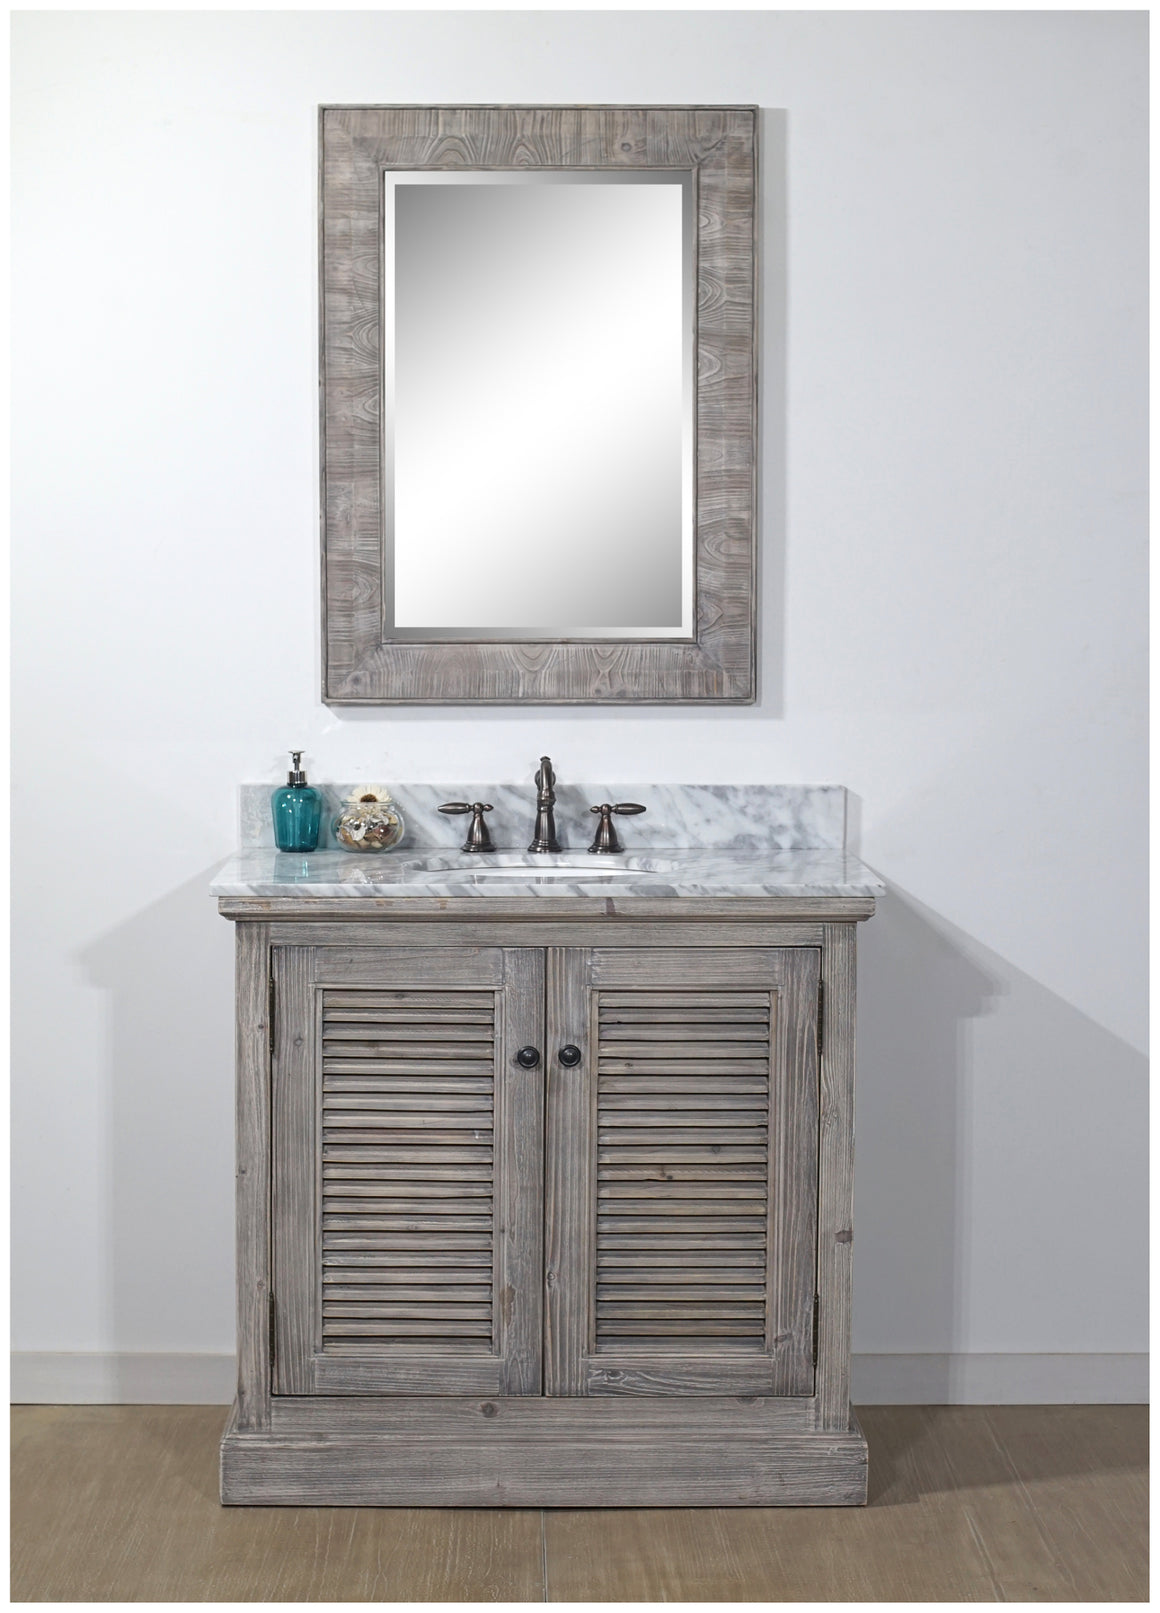 36" RUSTIC SOLID FIR SINGLE SINK VANITY IN GREY DRIFTWOOD WITH CARRARA WHITE MARBLE TOP-NO FAUCET